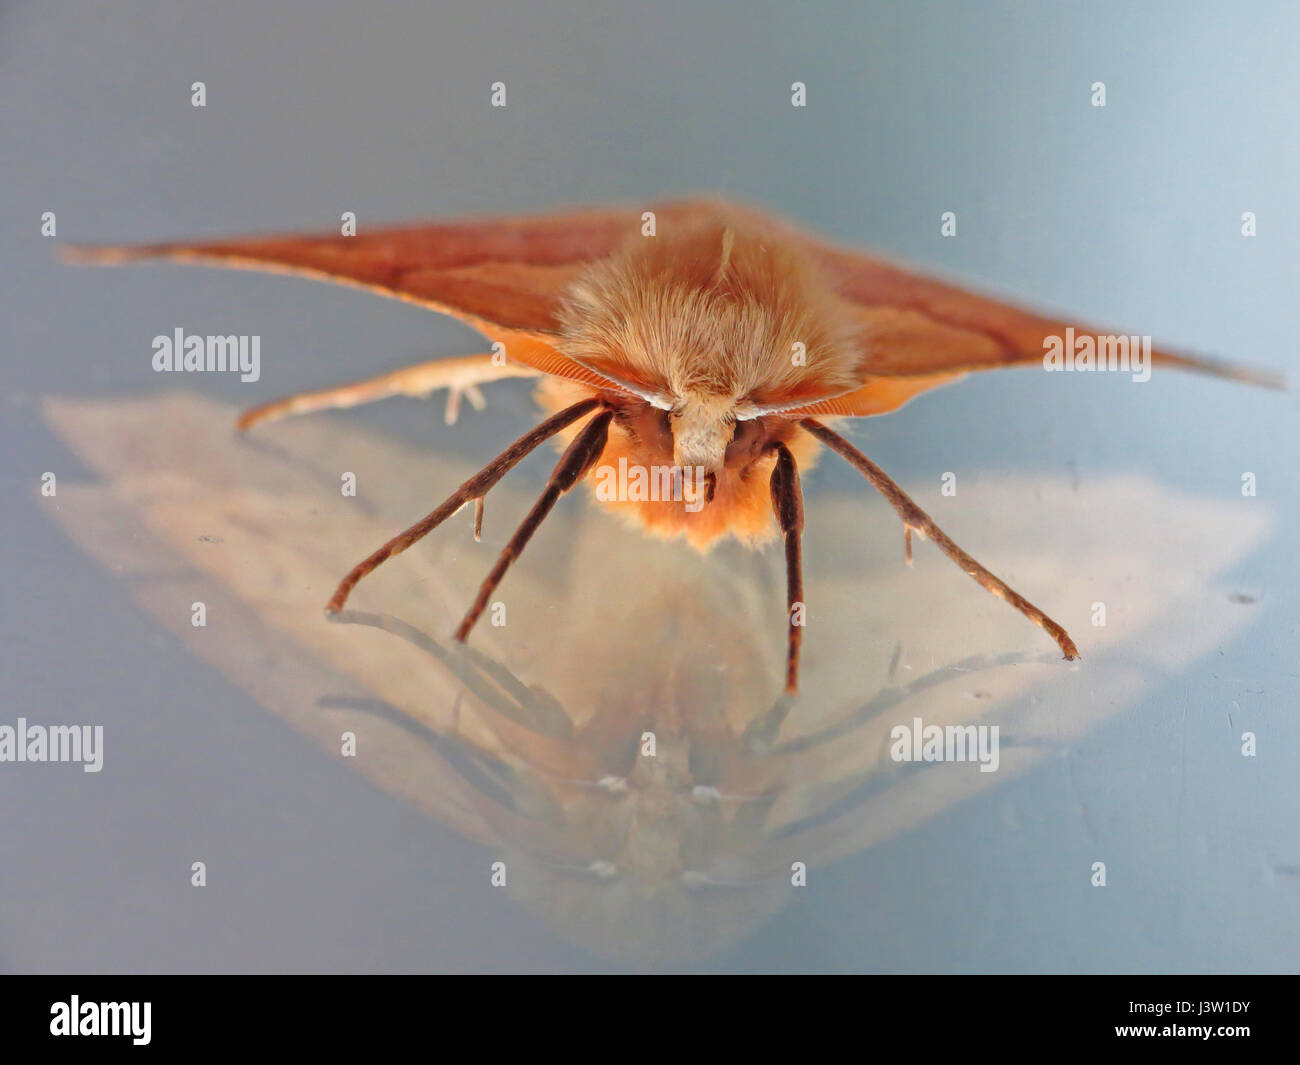 Unusual view of a scalloped oak moth on glass with reflection Stock Photo